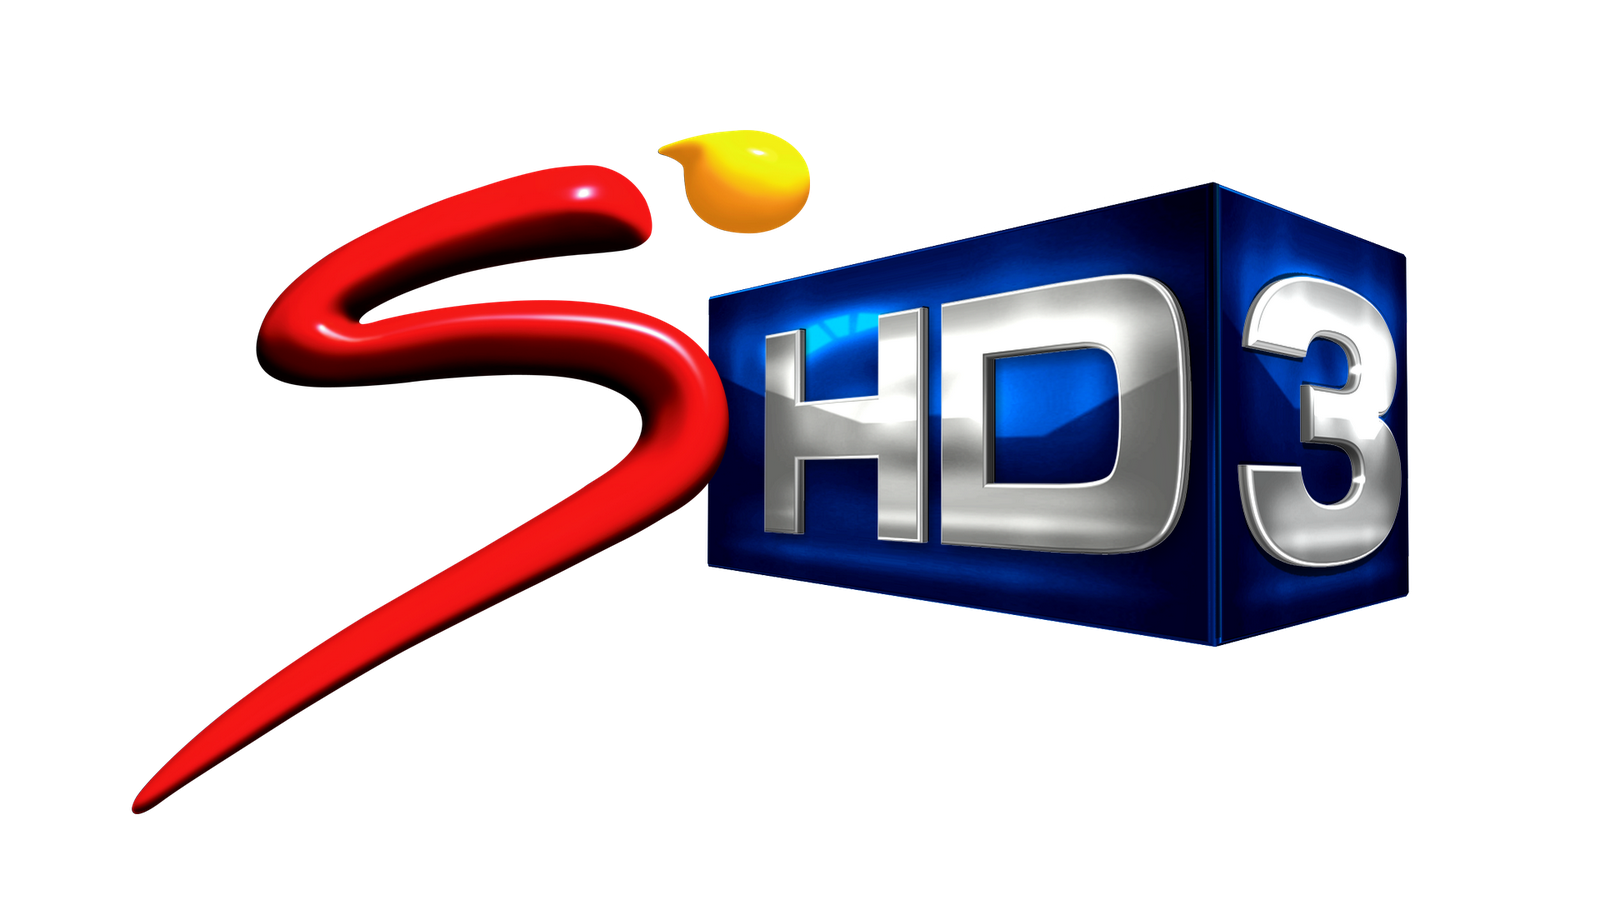 talkmedia DStv LAUNCHES 3RD SUPERSPORT HD CHANNEL